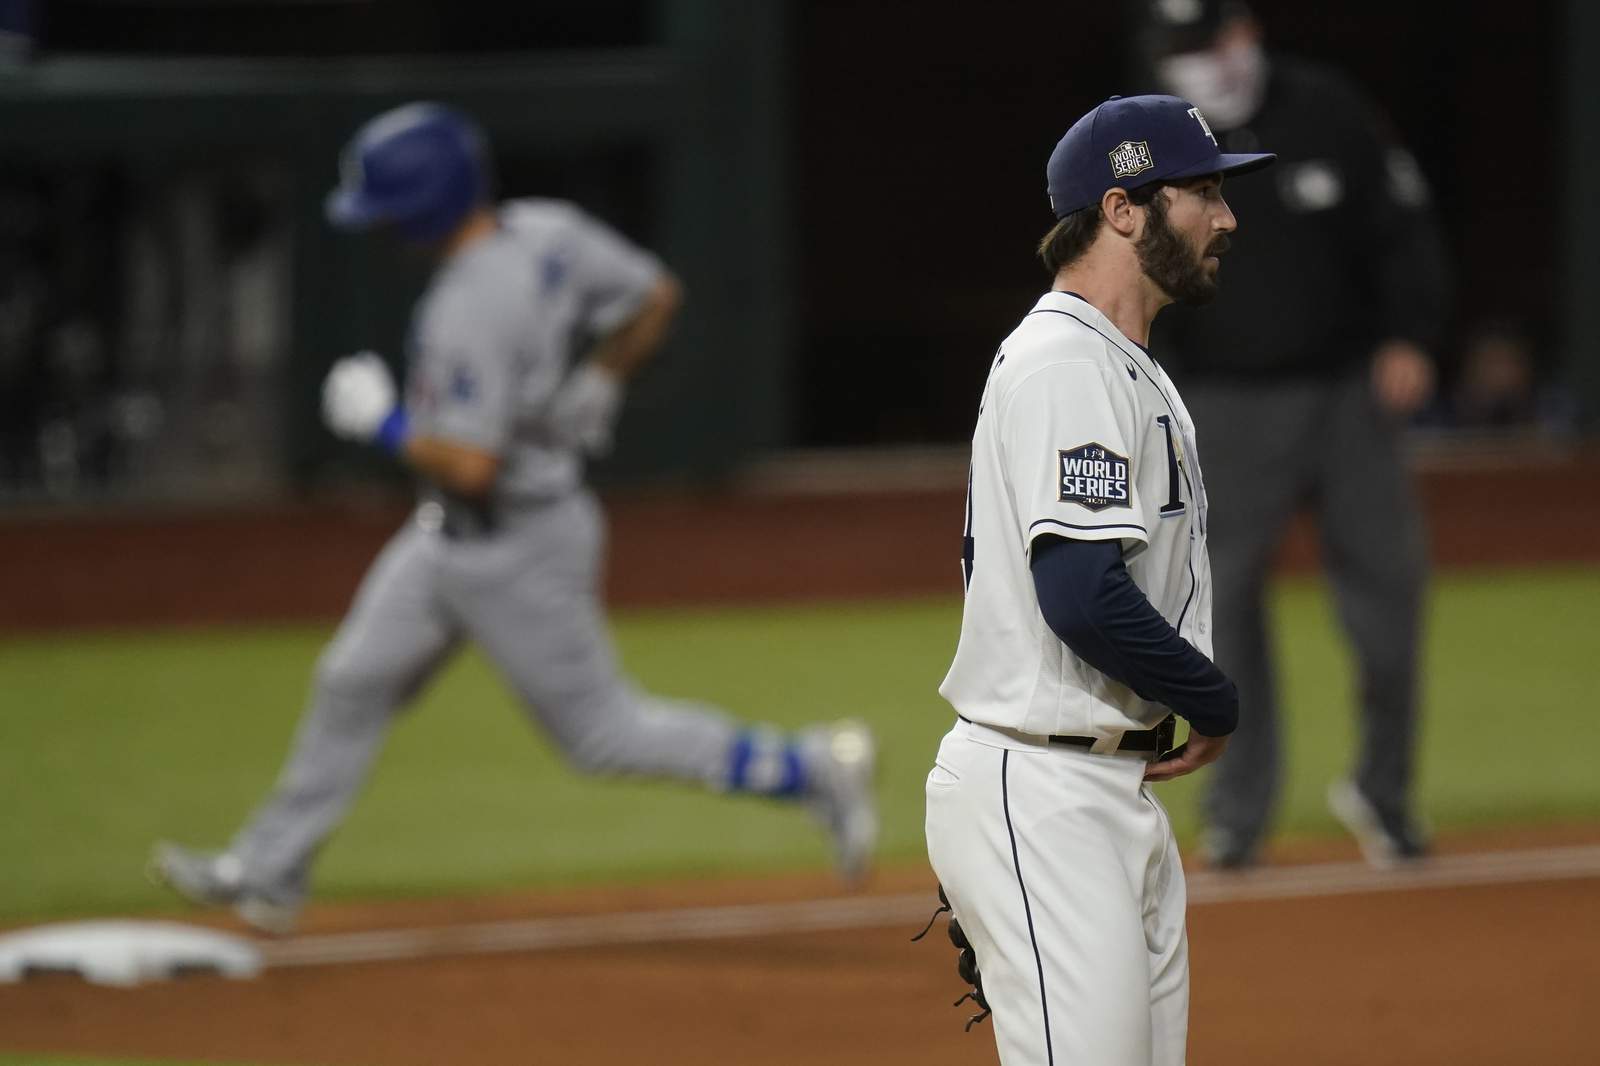 The Latest: LA leads Series 2-1 after dominant Buehler start